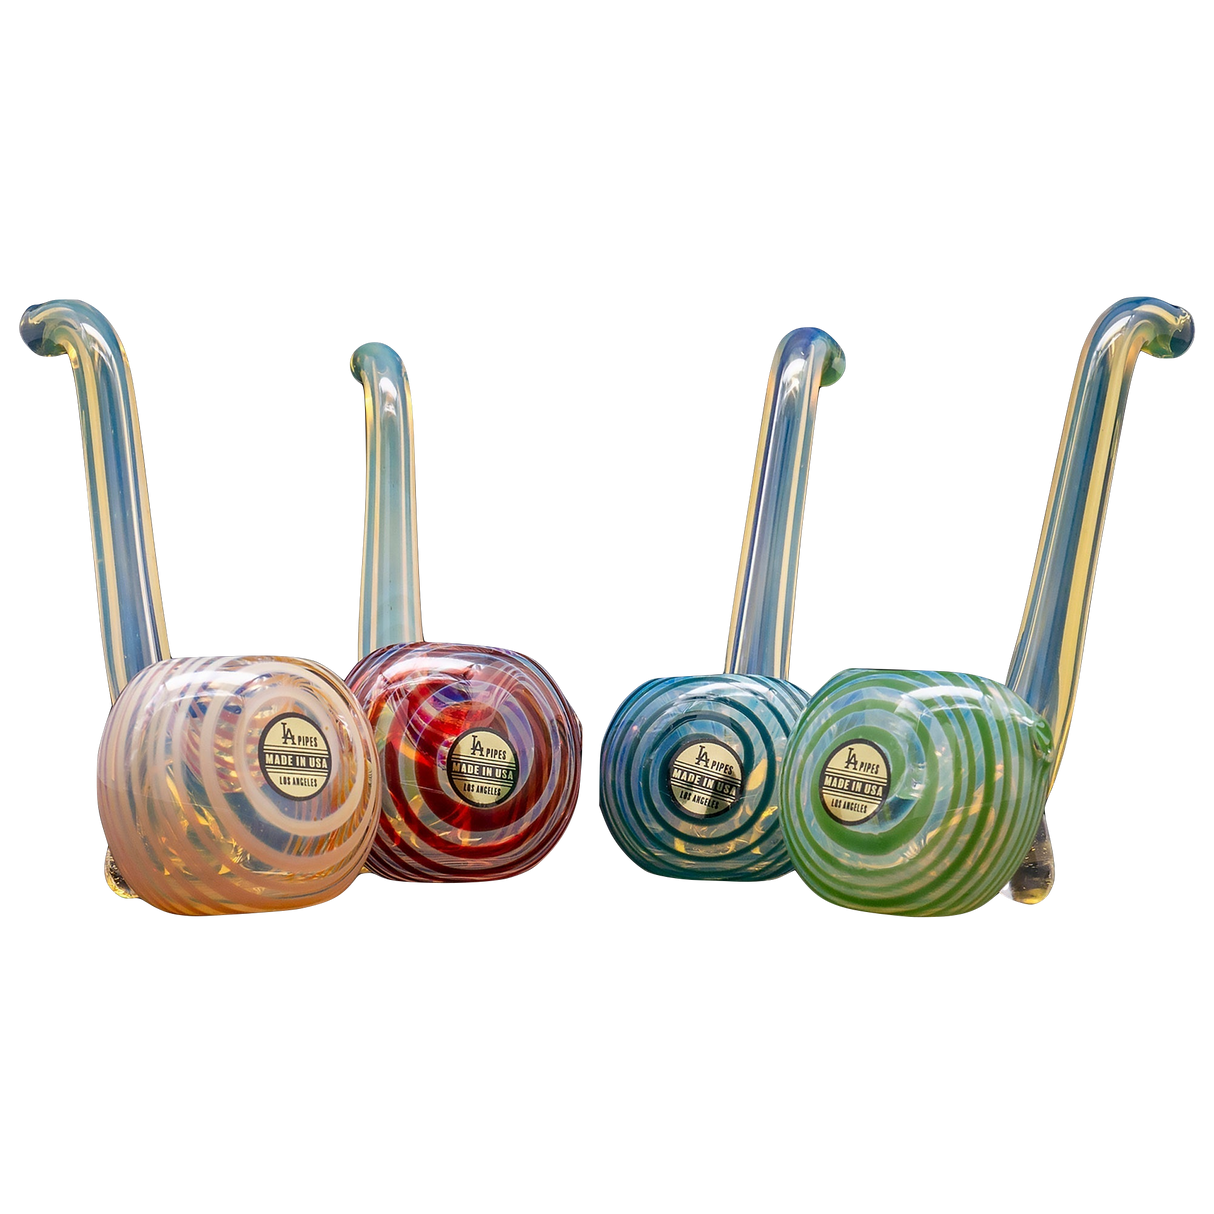 LA Pipes Borosilicate Glass Spoon Pipes in Various Swirled Colors - Front View